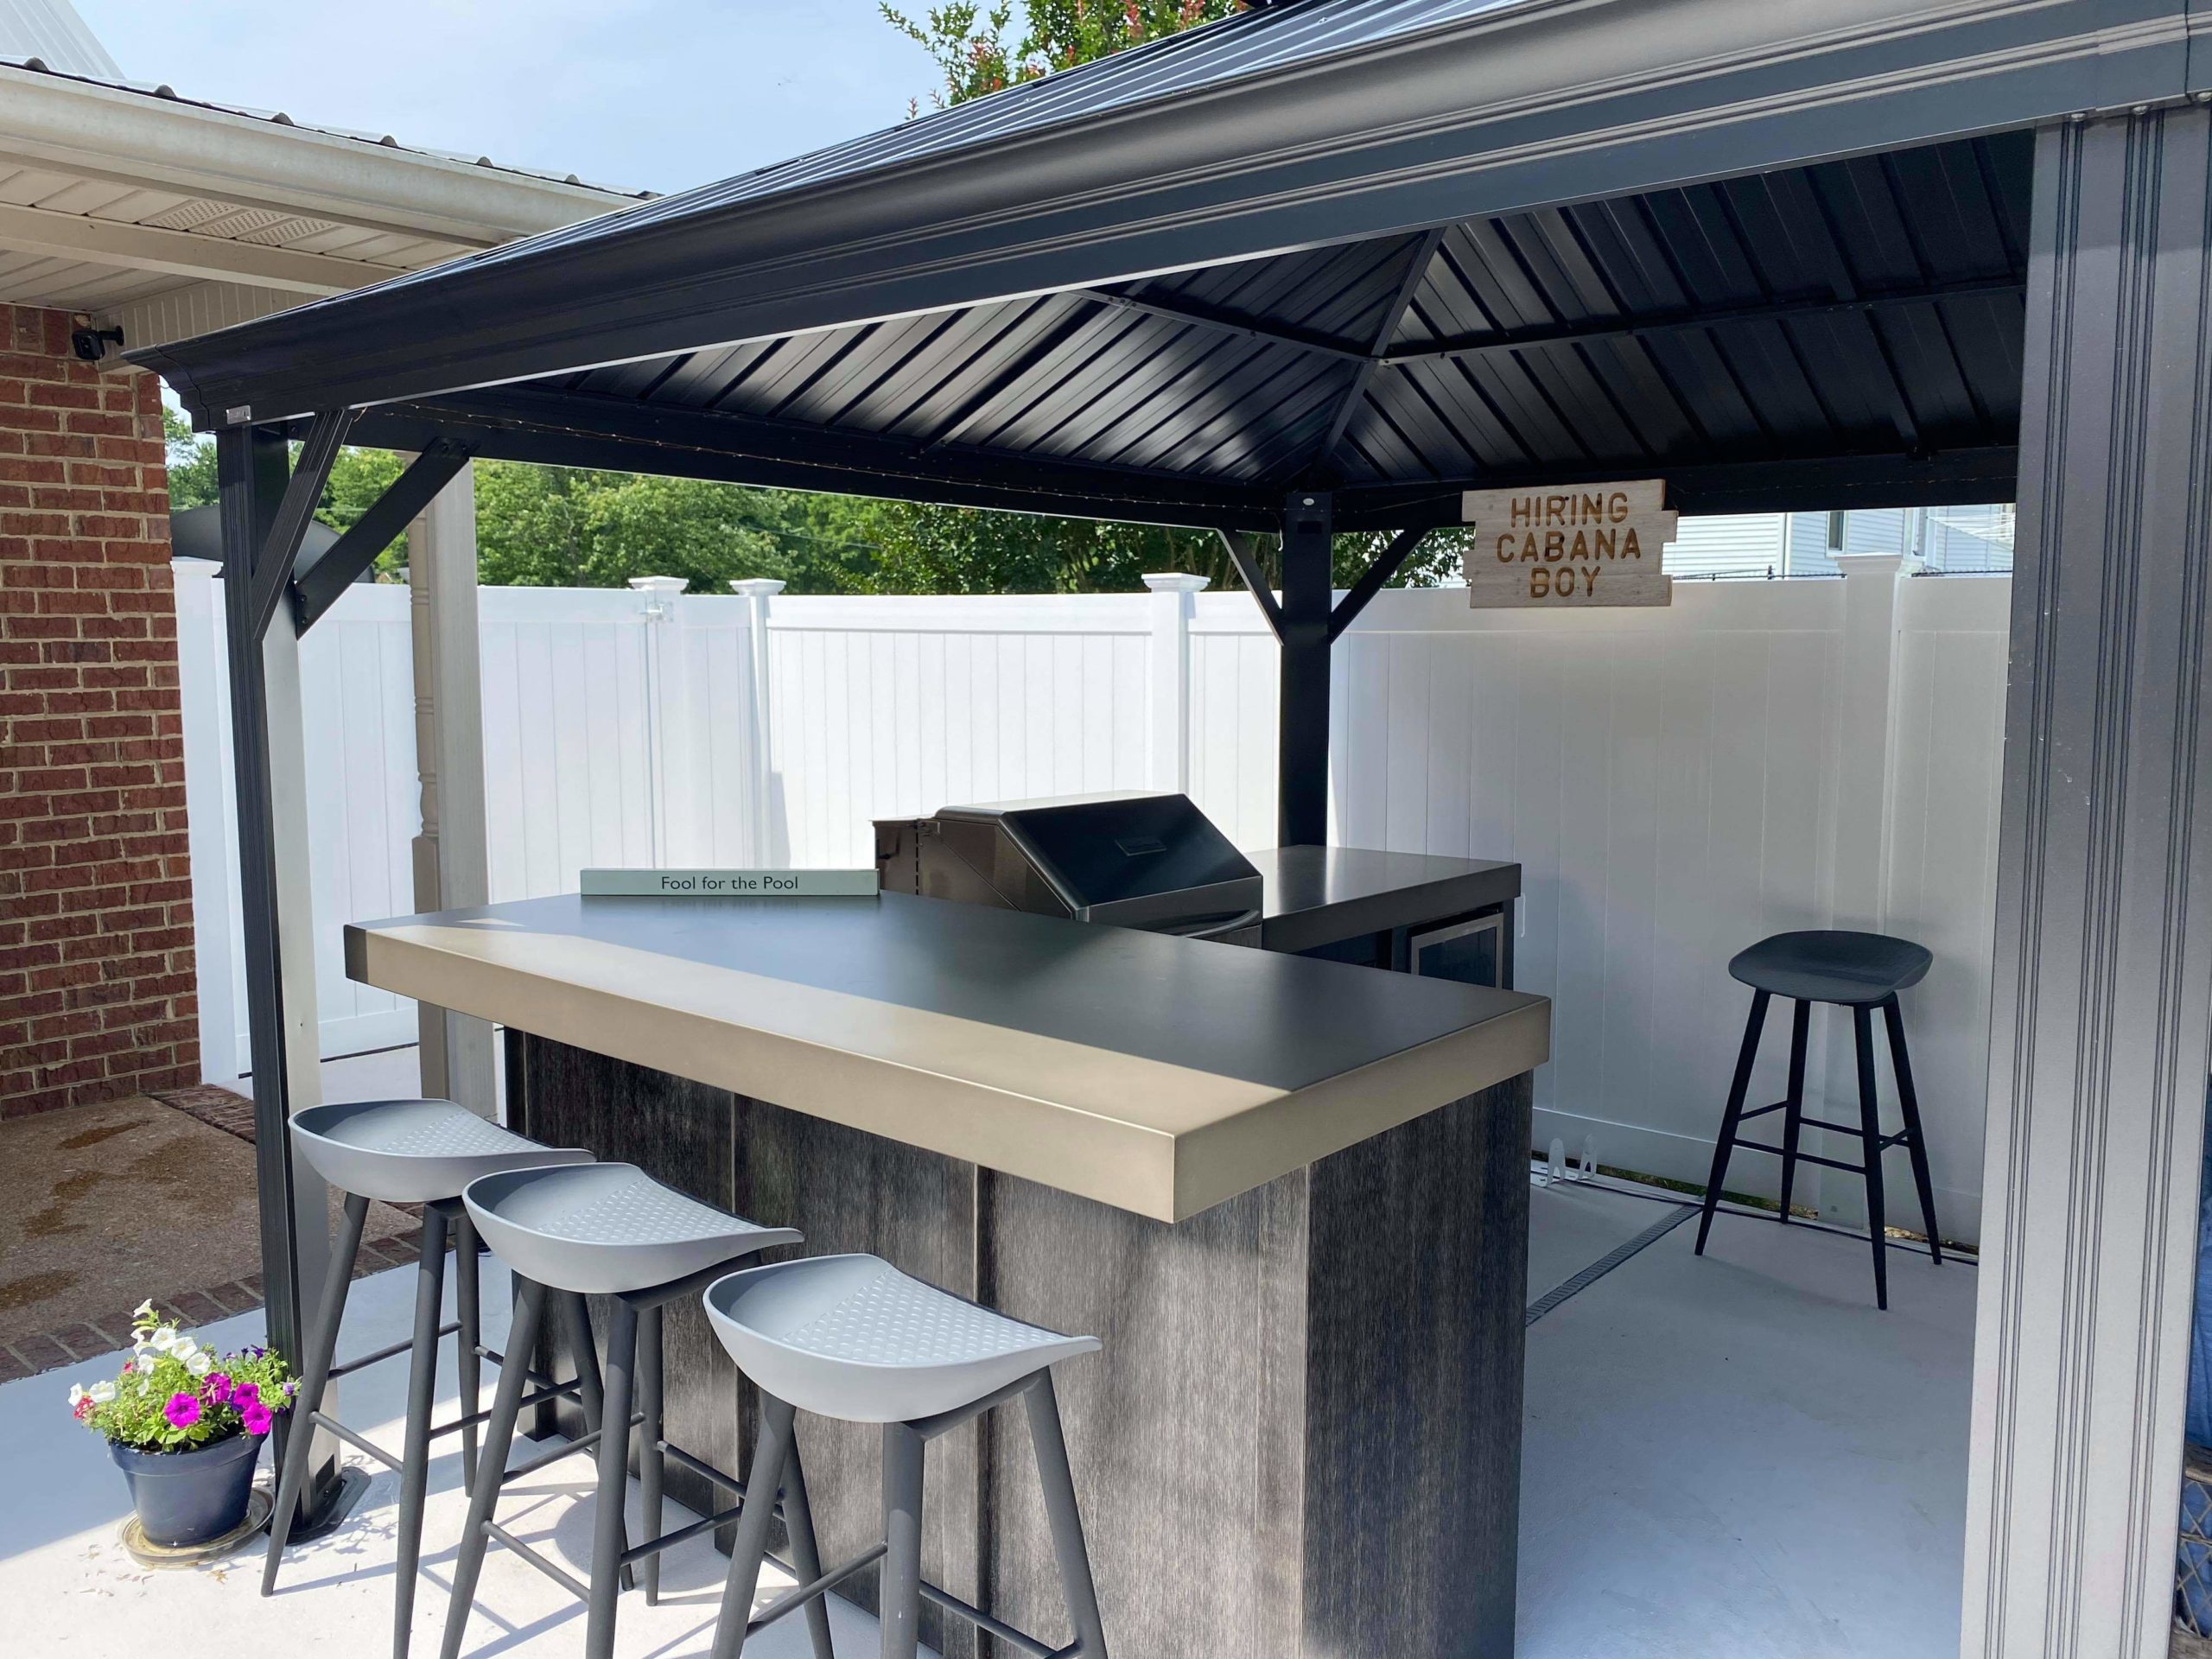 Outdoor kitchen bar with seating